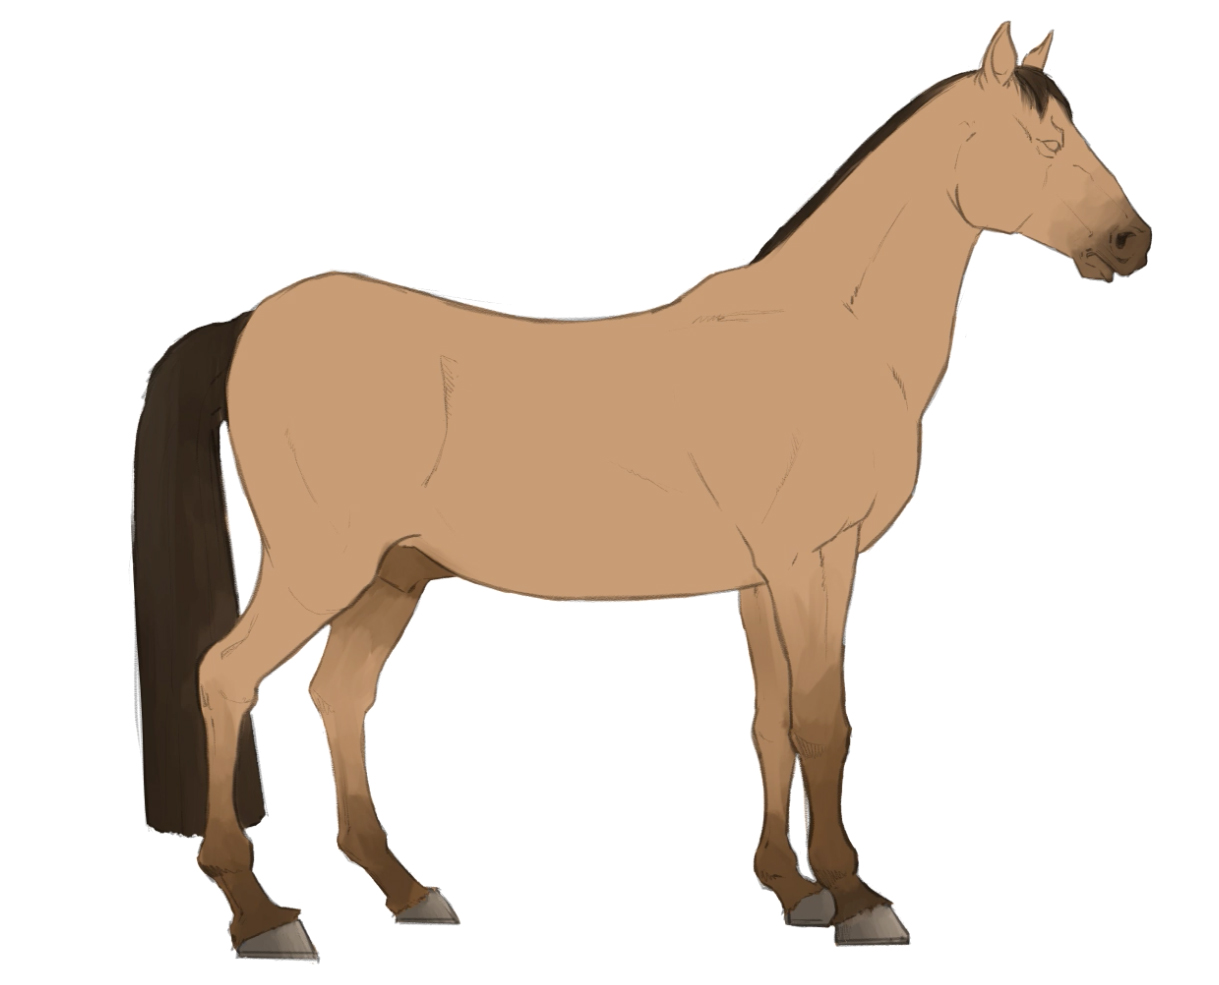 How To Draw A Horse In 10 Steps [A Beginner's Guide]